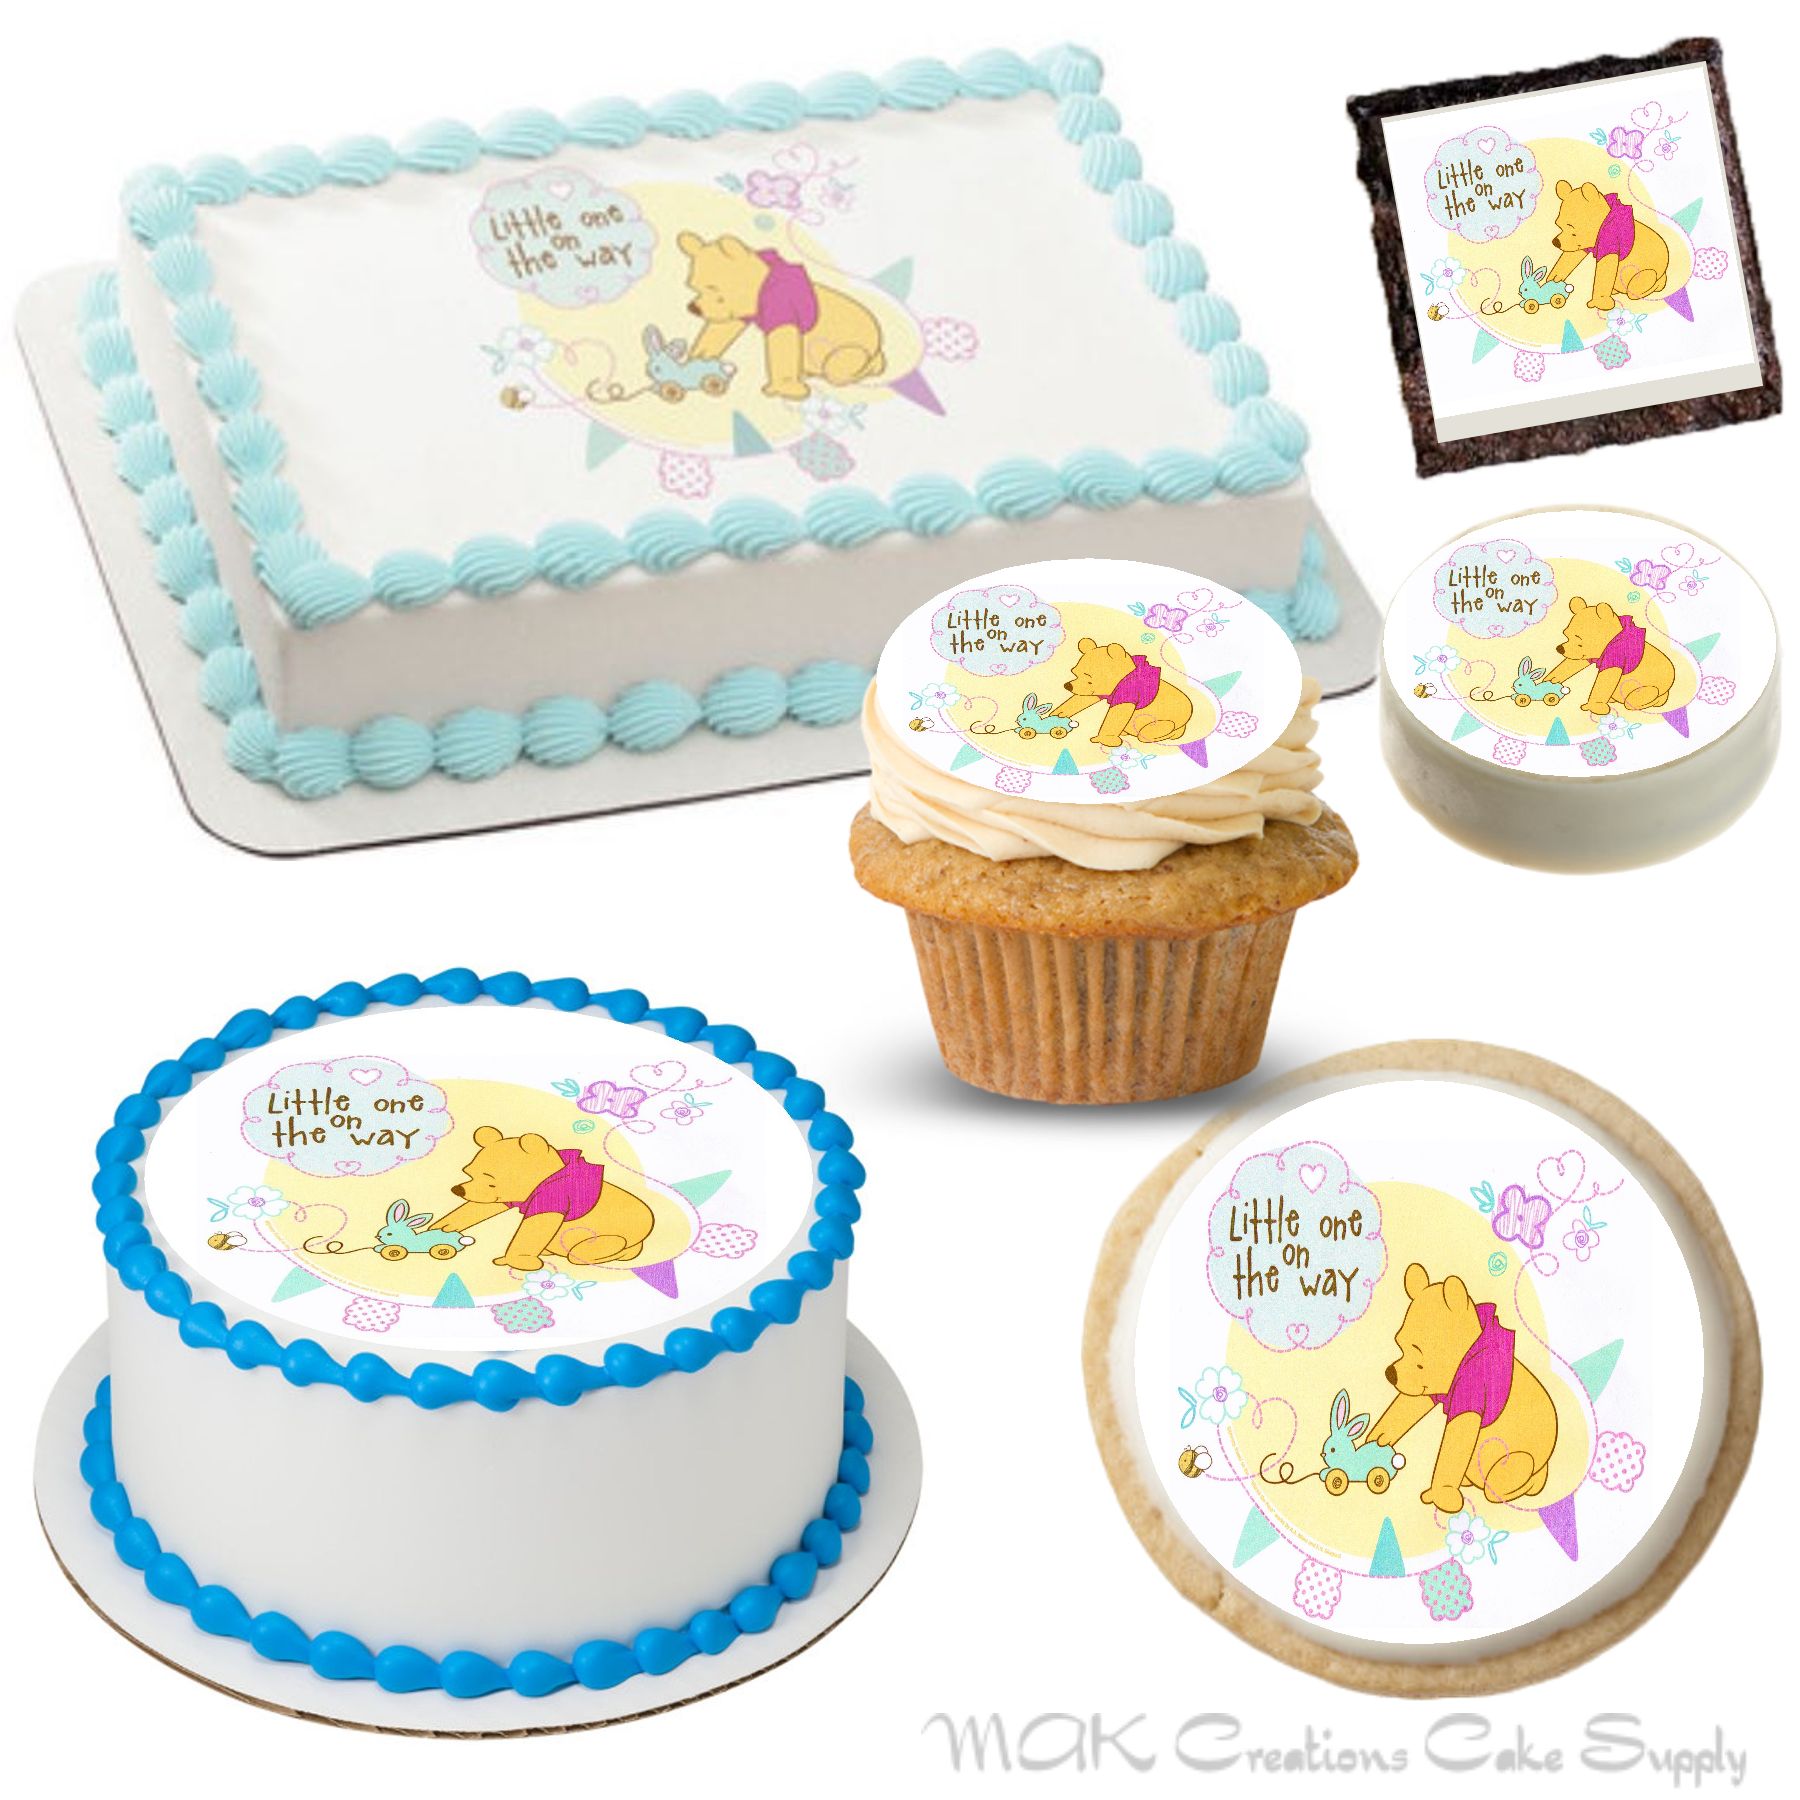 Winnie The Pooh Personalised Edible Cake Topper Decoration Images